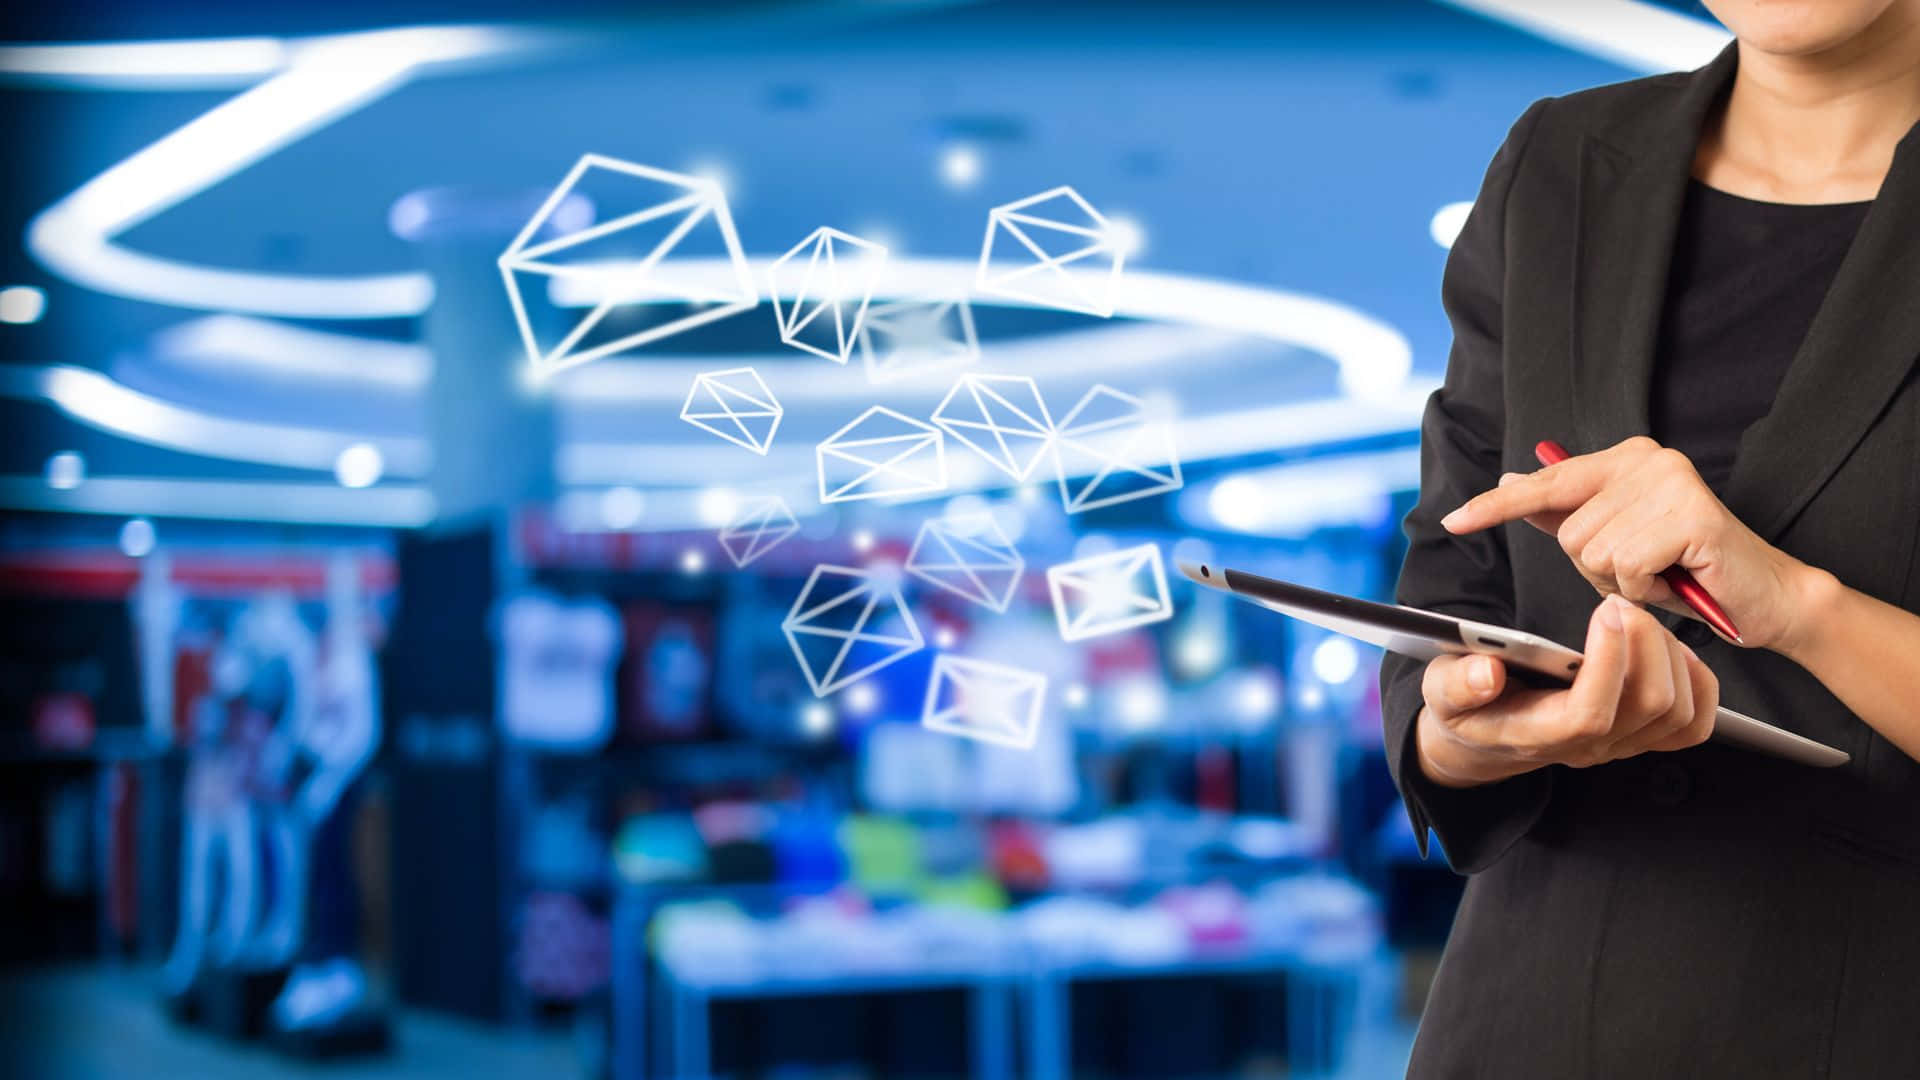 "Stay Connected: Enhance Your Communication with Email"